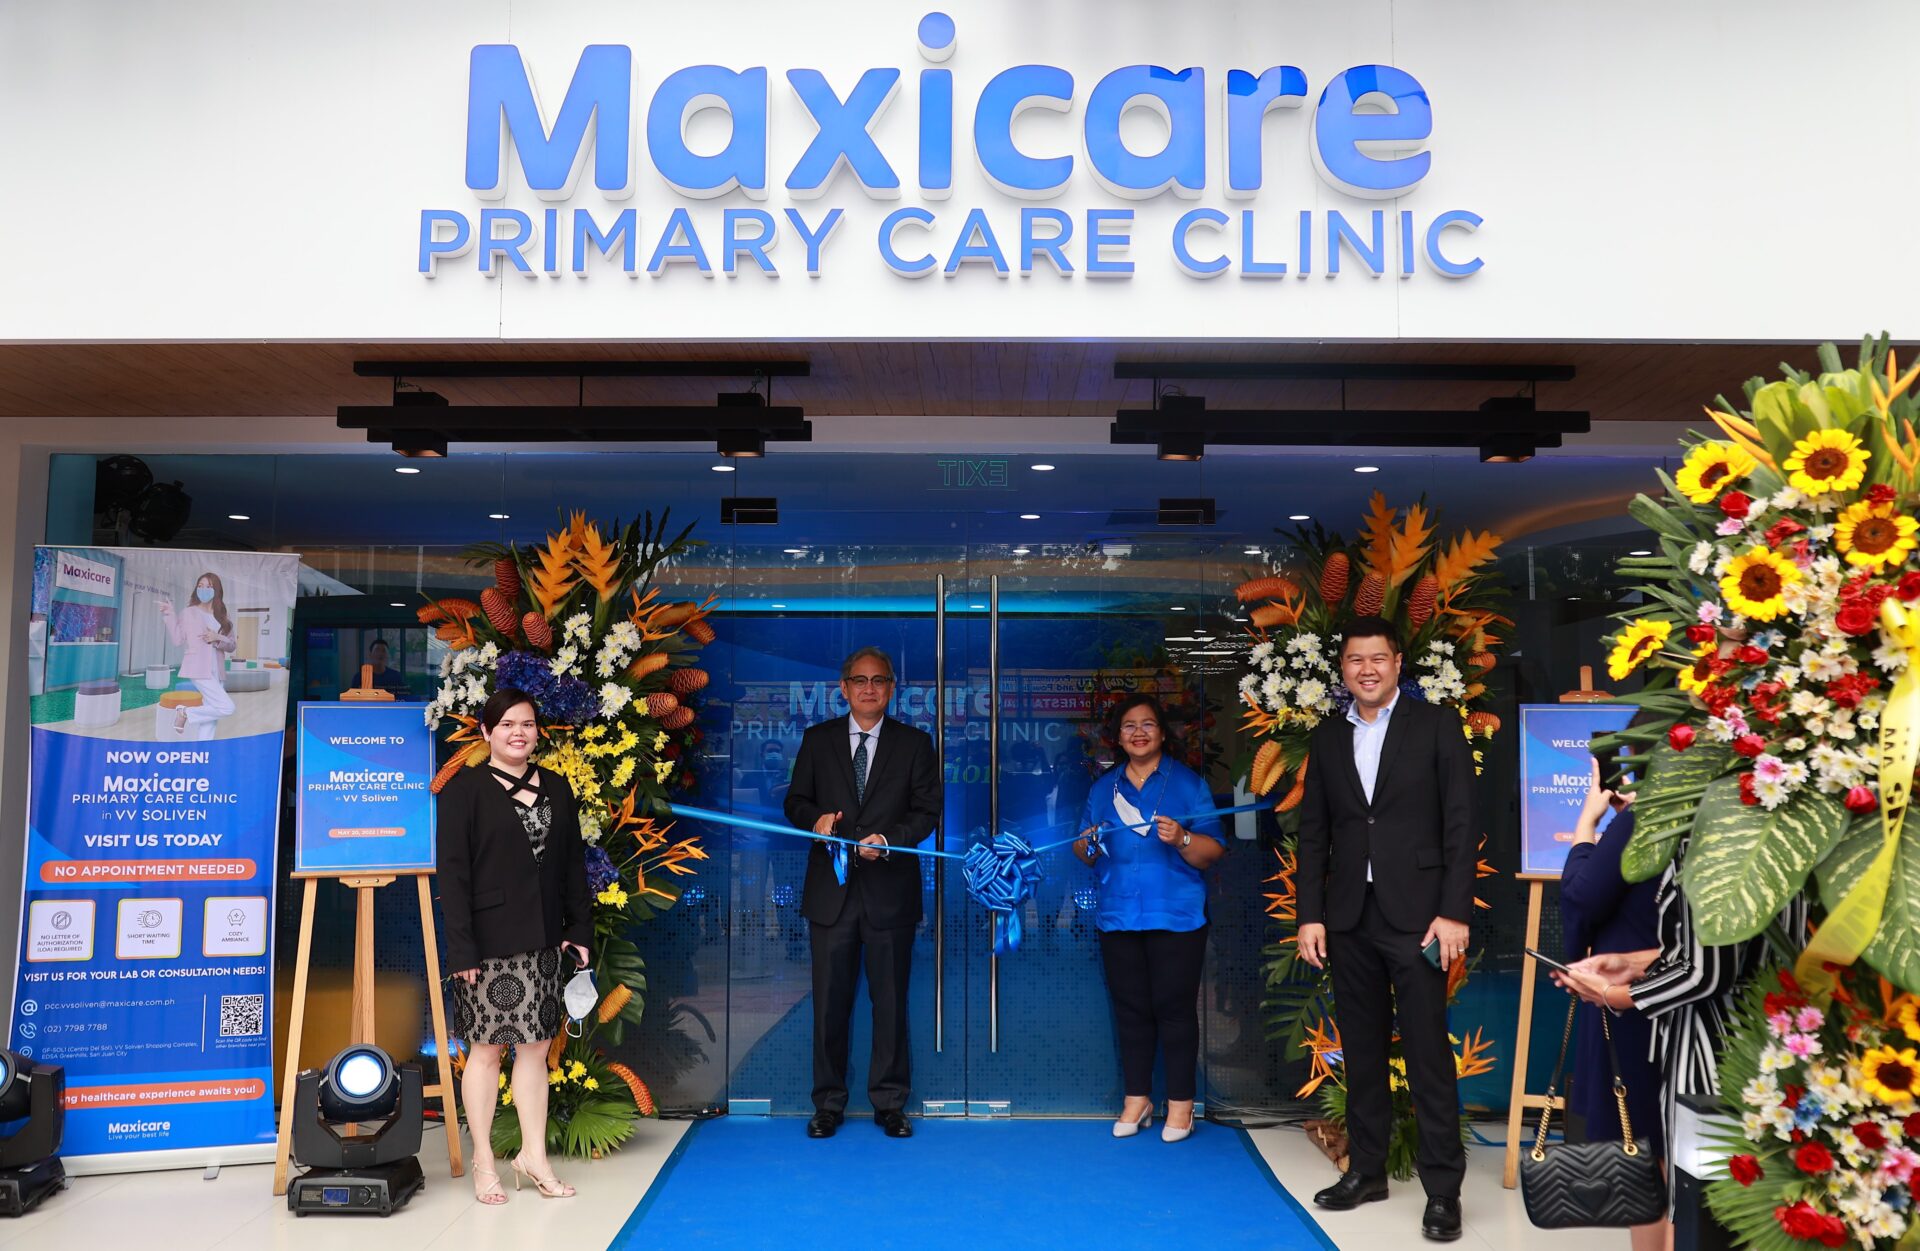 No appointment needed at Maxicare’s new Primary Care Clinics in VV